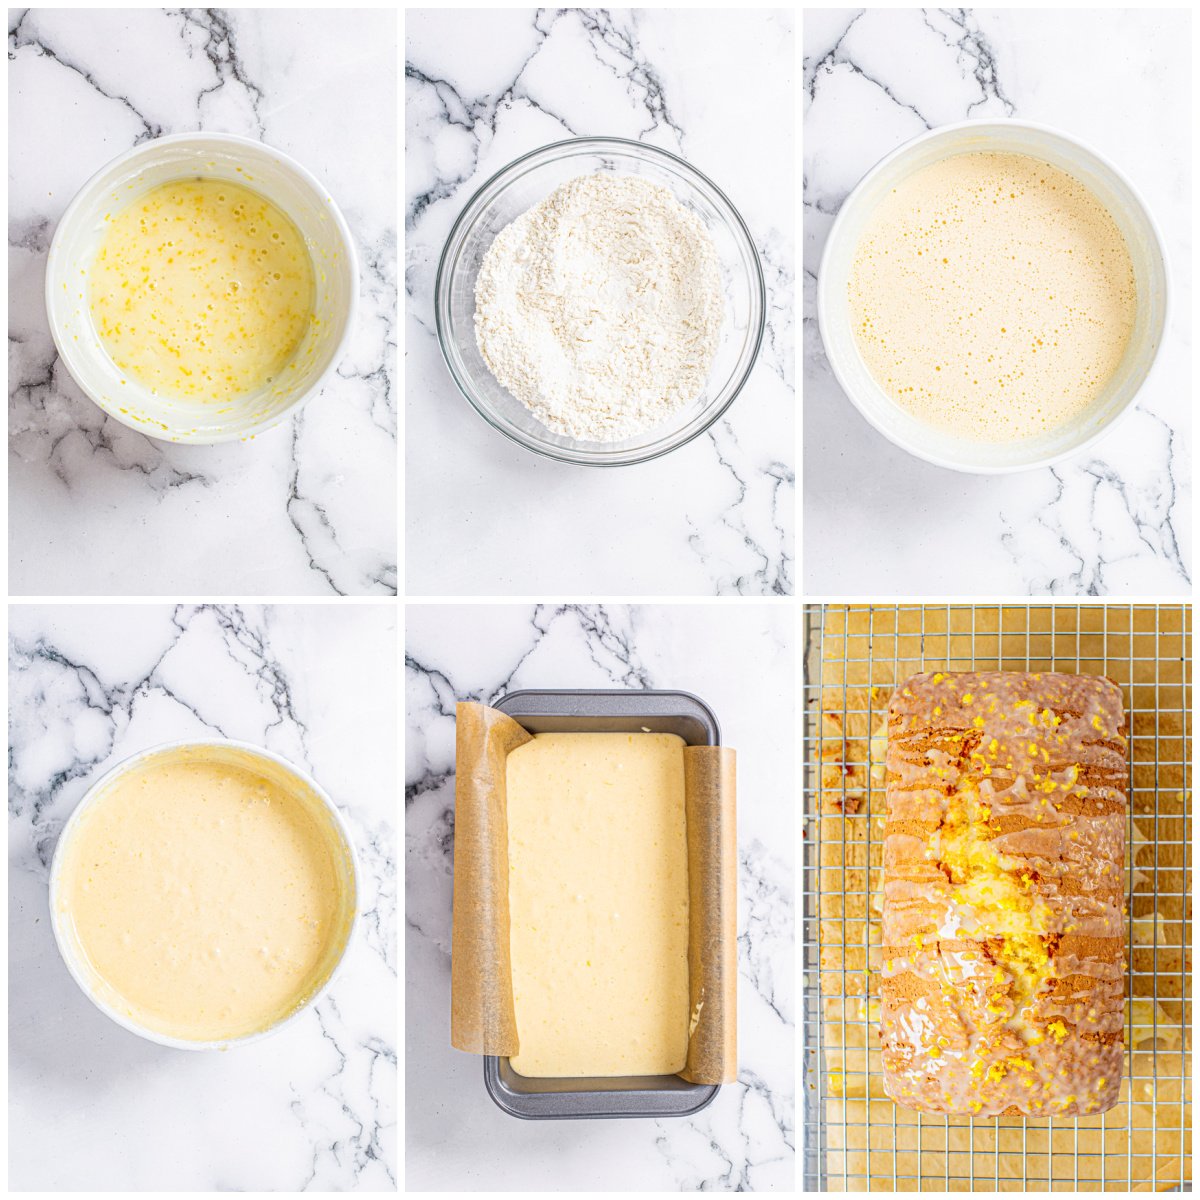 Step by step photos on how to make Lemon Bread.